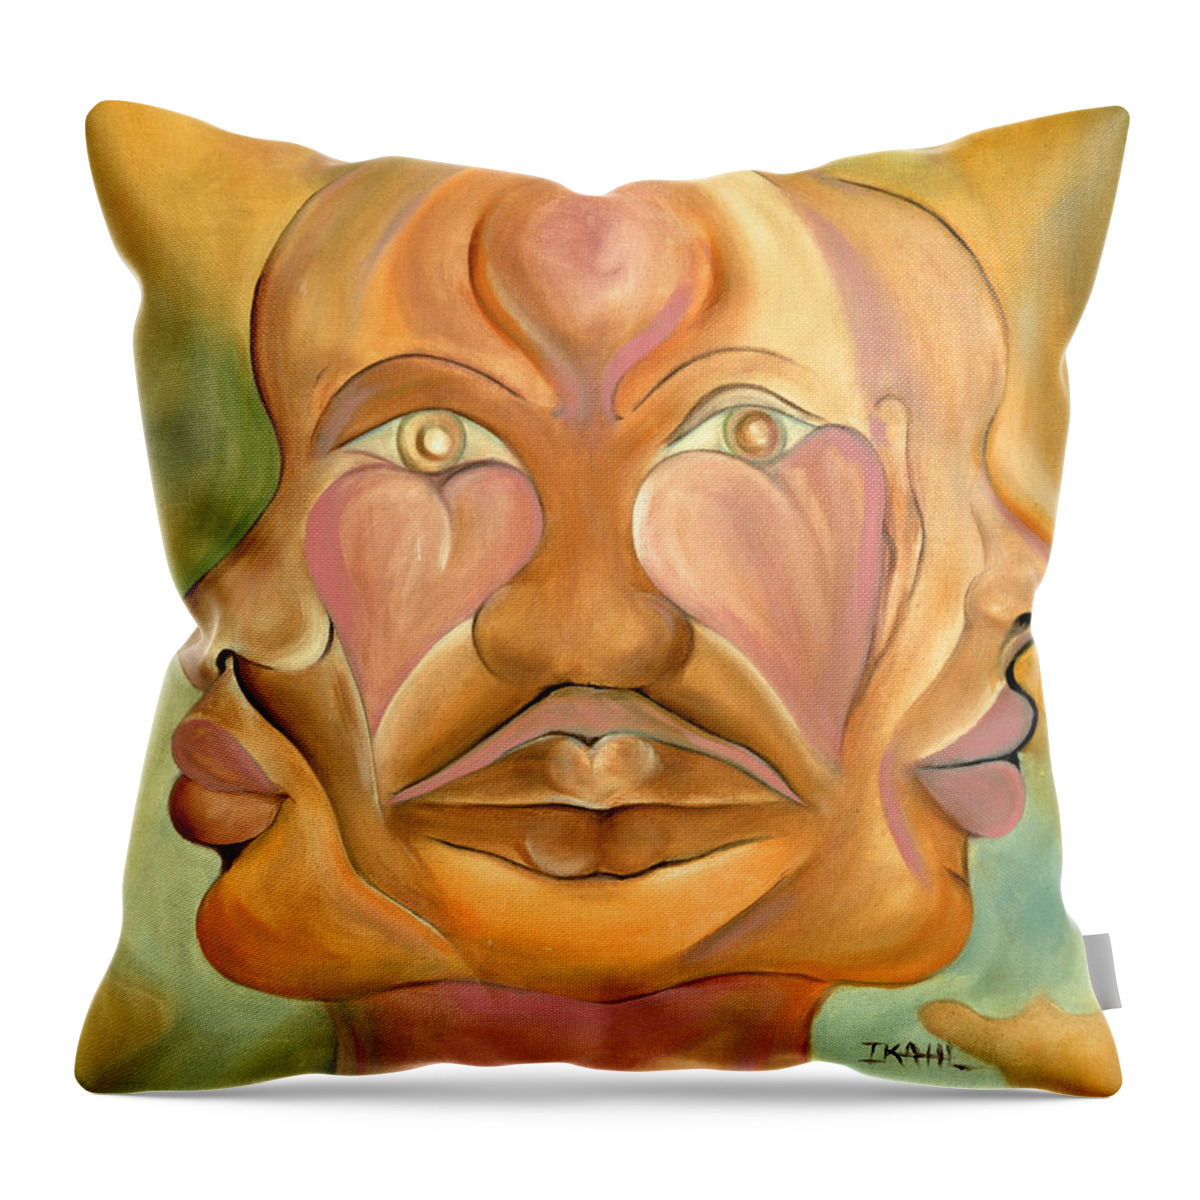 Human Throw Pillow featuring the painting Faces of Copulation by Ikahl Beckford